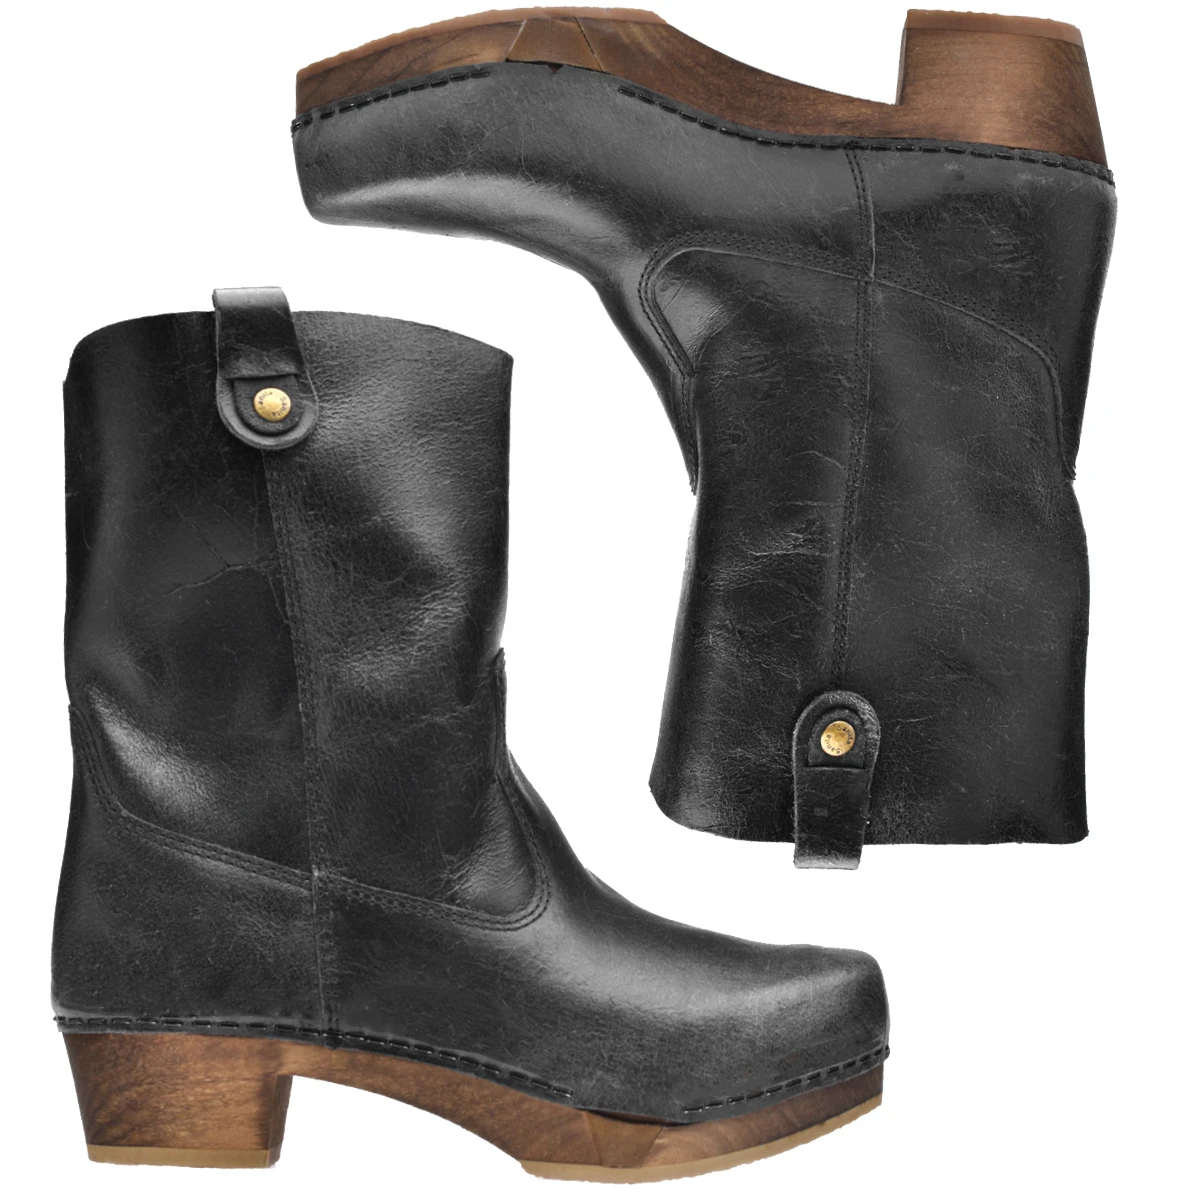 opgroeien zakdoek Vervagen Clogs boots from Sanita - buy our delicious clogs here